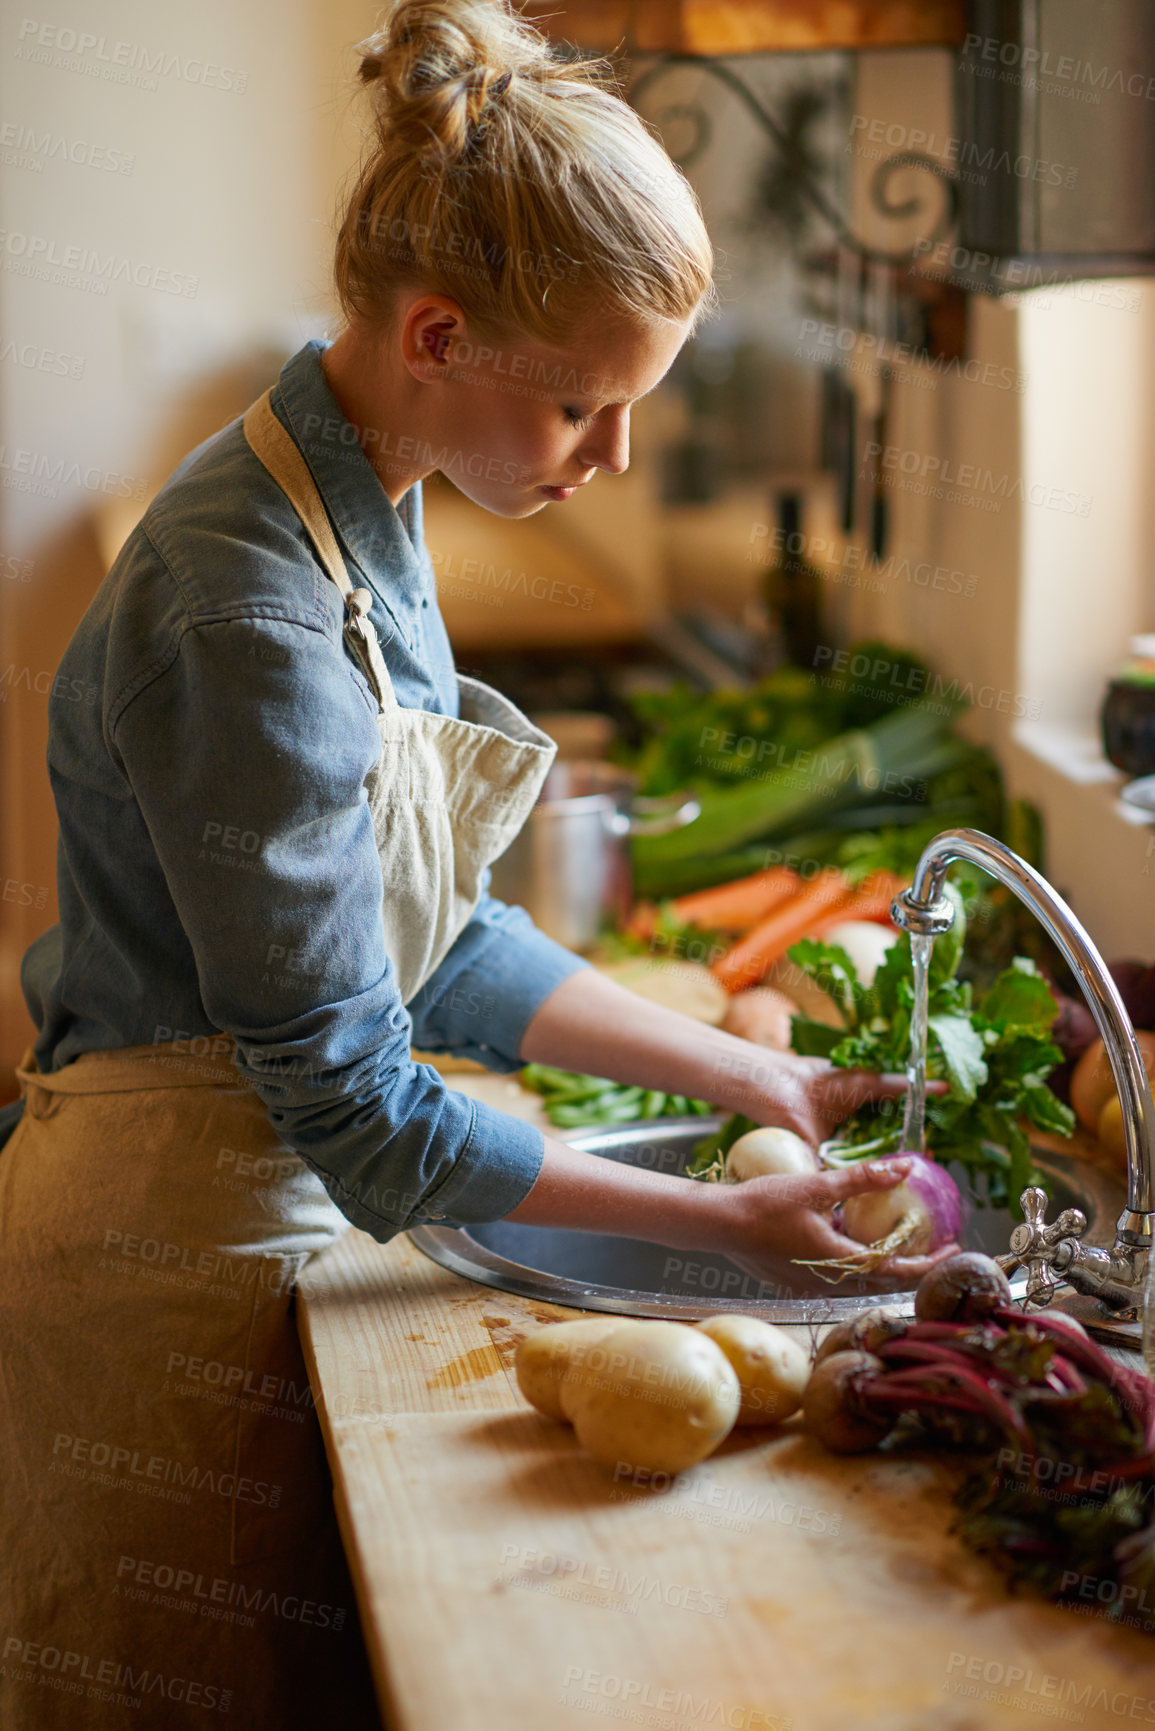 Buy stock photo Shot of a young woman  washing vegetables in a sink